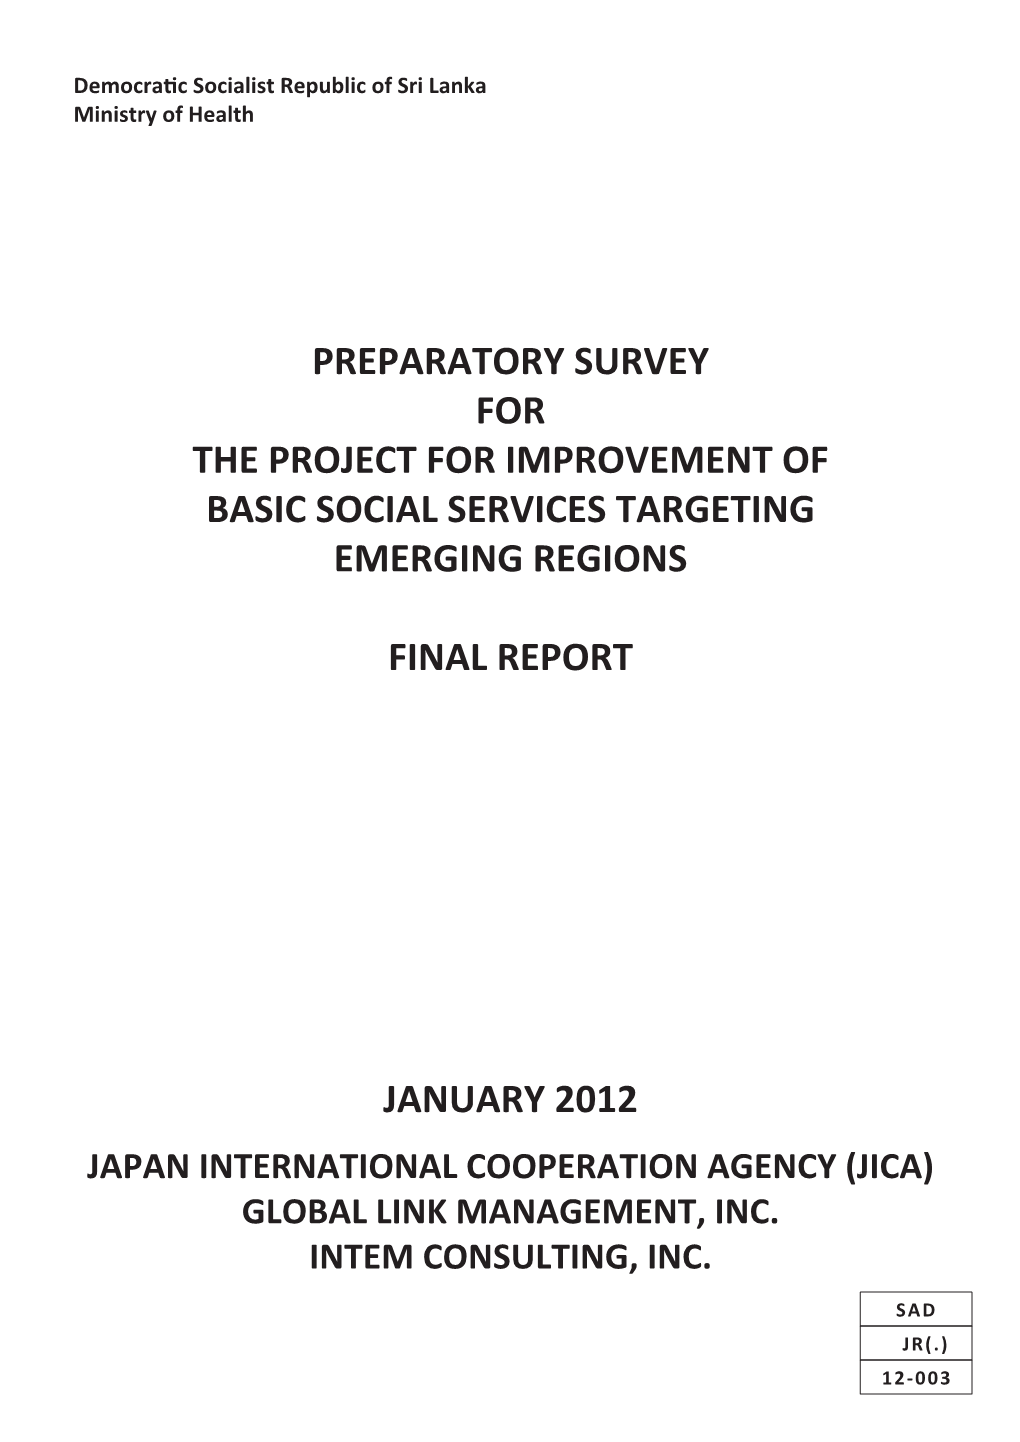 Preparatory Survey for the Project for Improvement of Basic Social Services Targeting Emerging Regions